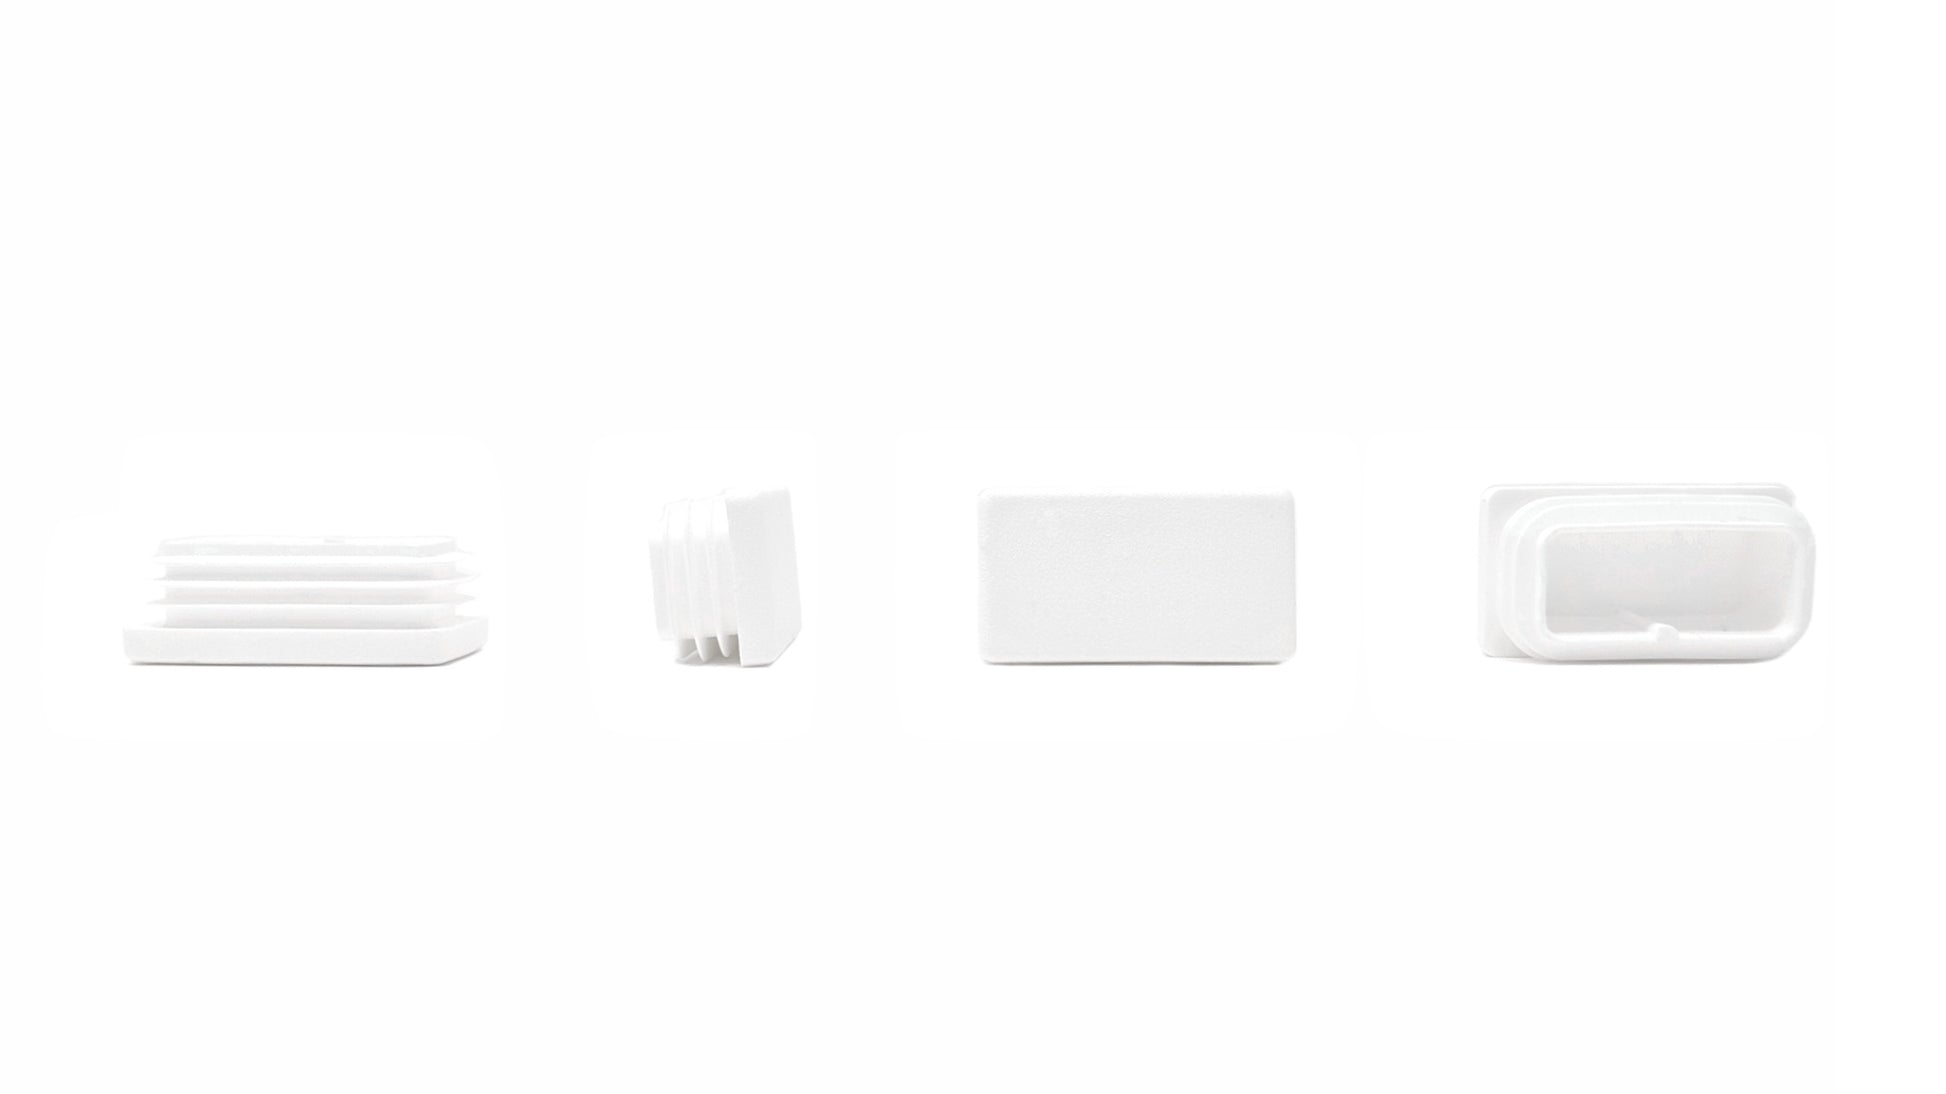 Rectangular Tube Inserts 45mm x 25mm White | Made in Germany | Keay Vital Parts - Keay Vital Parts